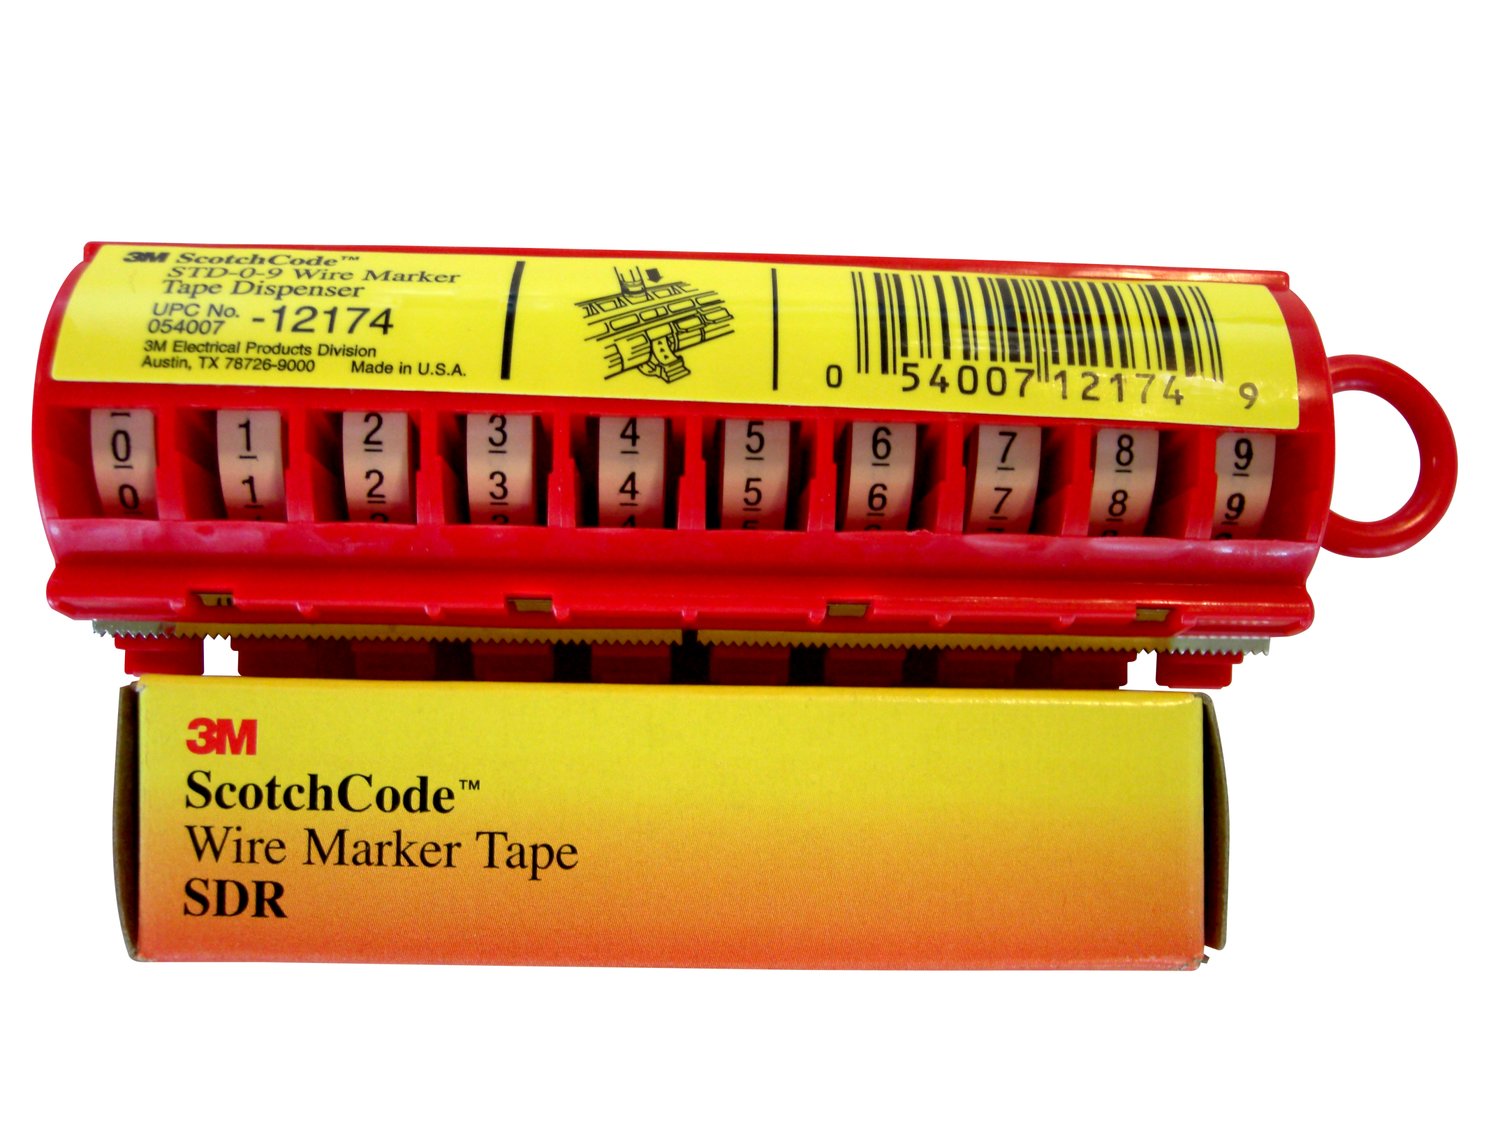 7100165054 - 3M Wire Marker Tape Numbers SDR 80-90, 50 Rolls/Case